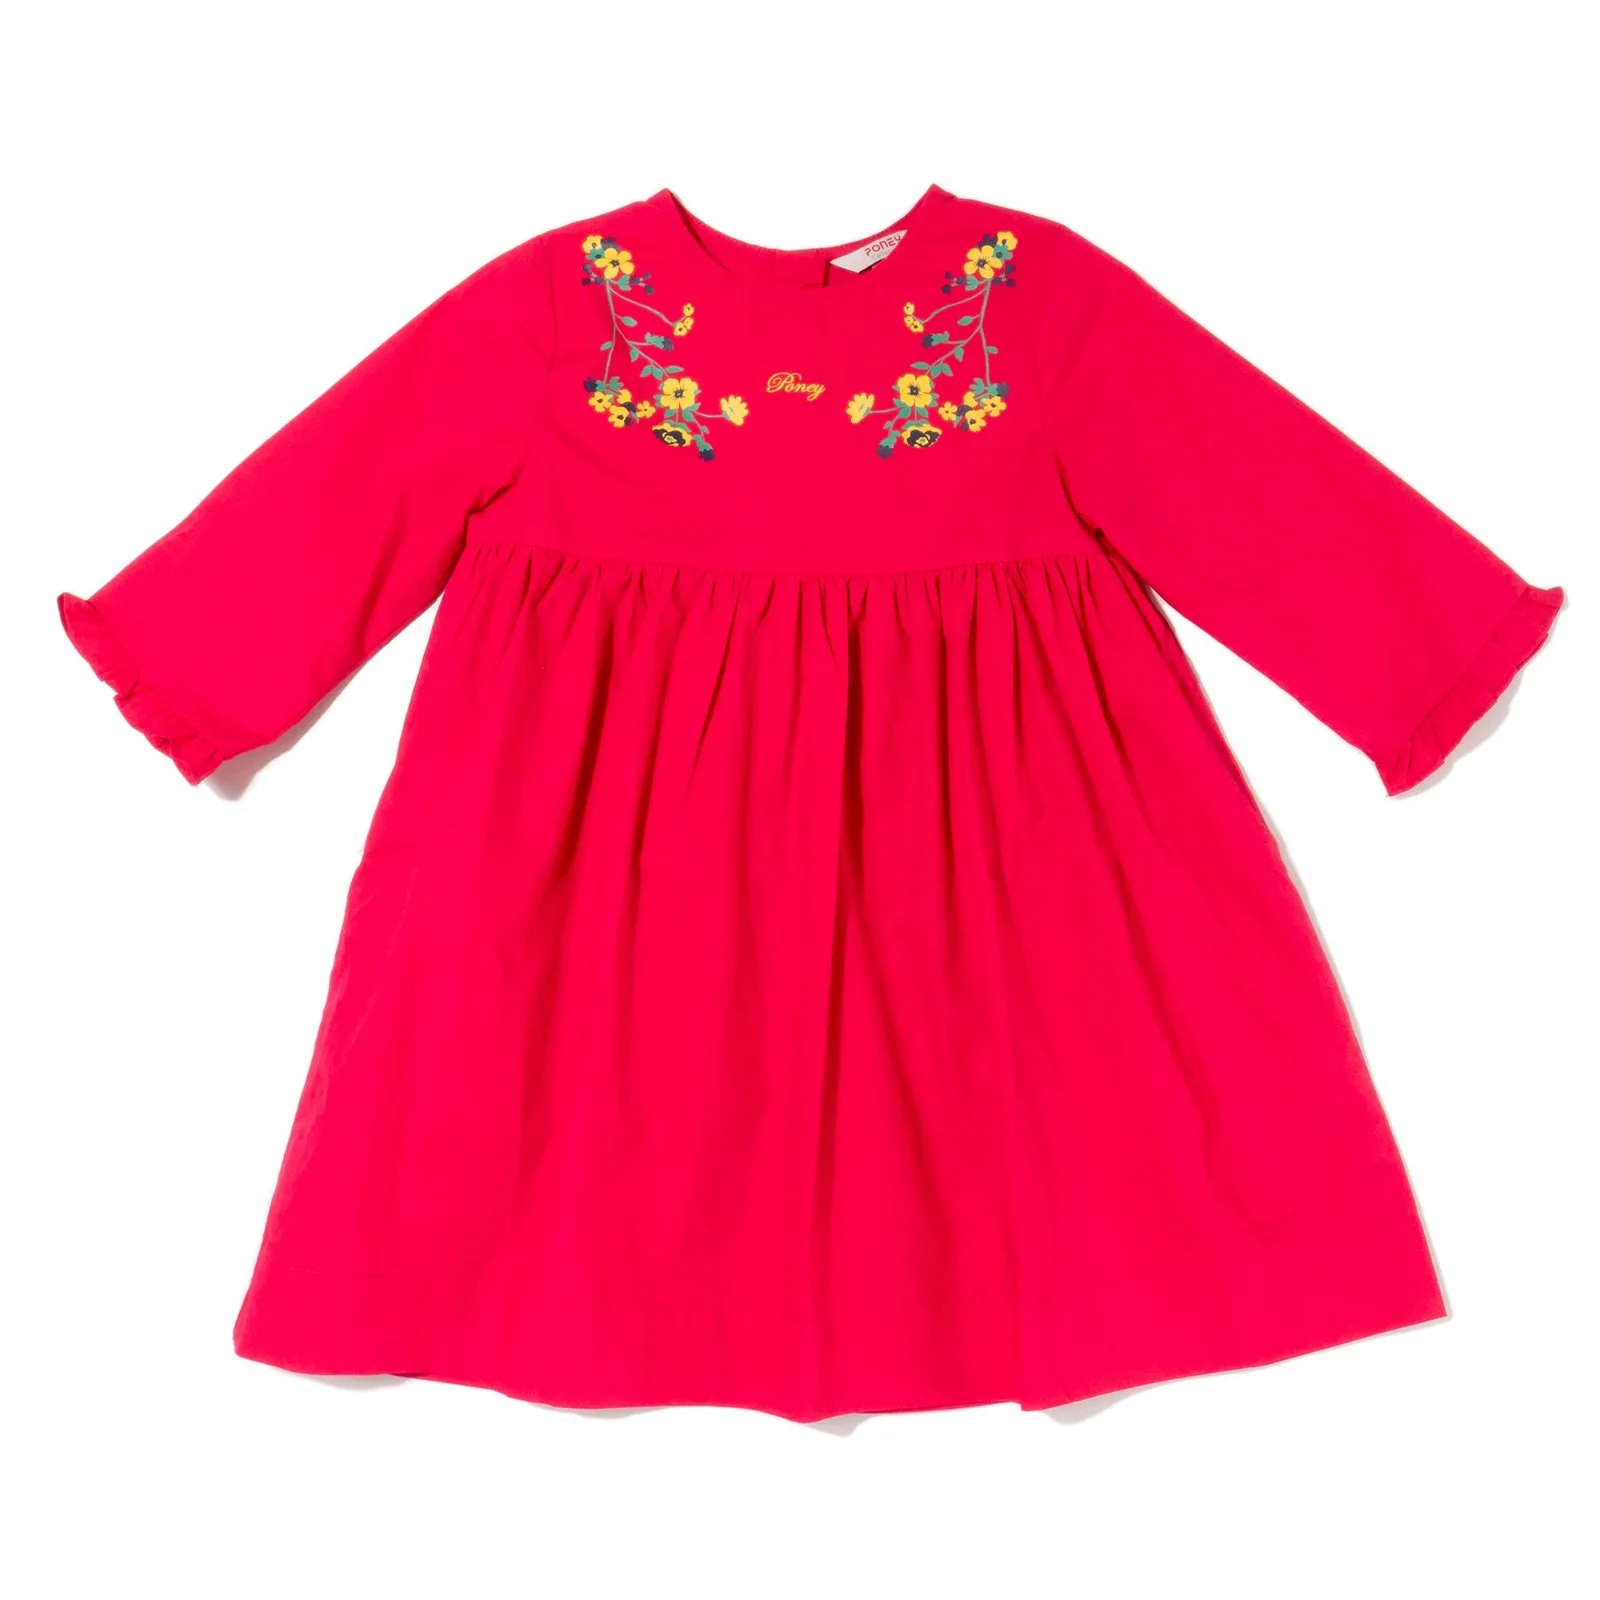 Image of [Clearance] Poney Girls L/Sleeve Dress 7918 (6mths-12yrs)